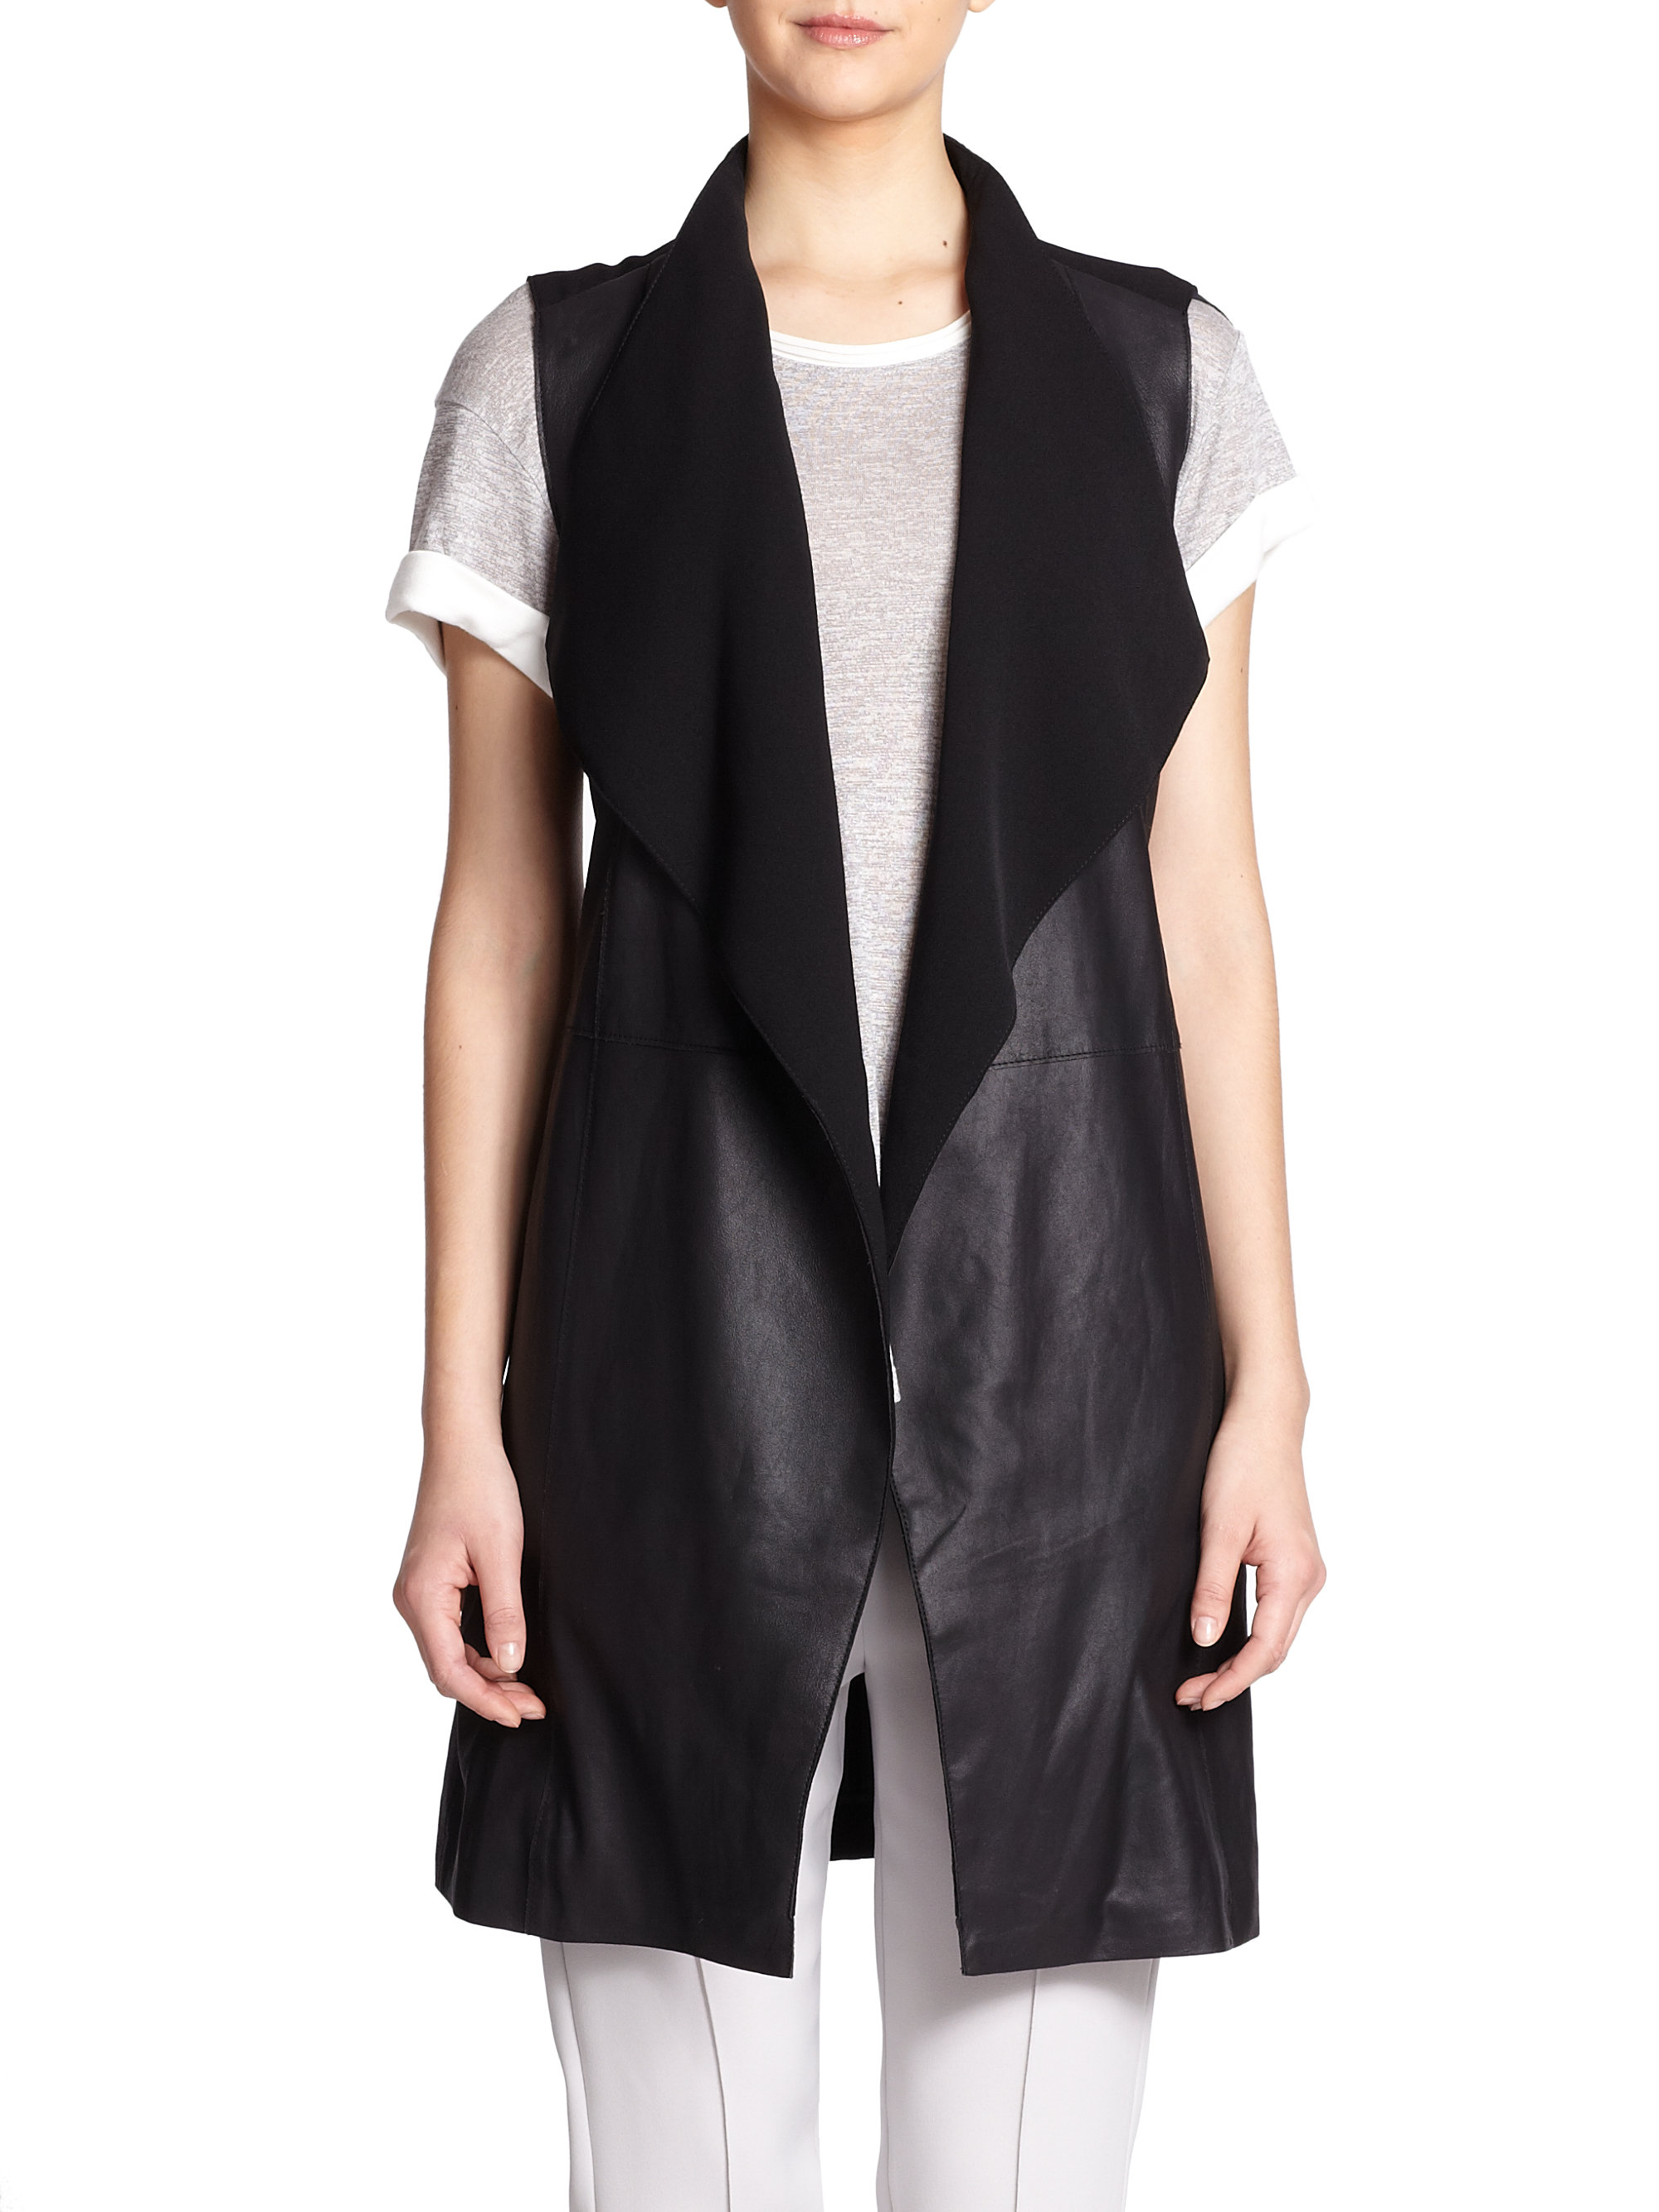 Flygo Womens Sherpa Lined Mid-Long Cool Sleeveless PU Leather Vest